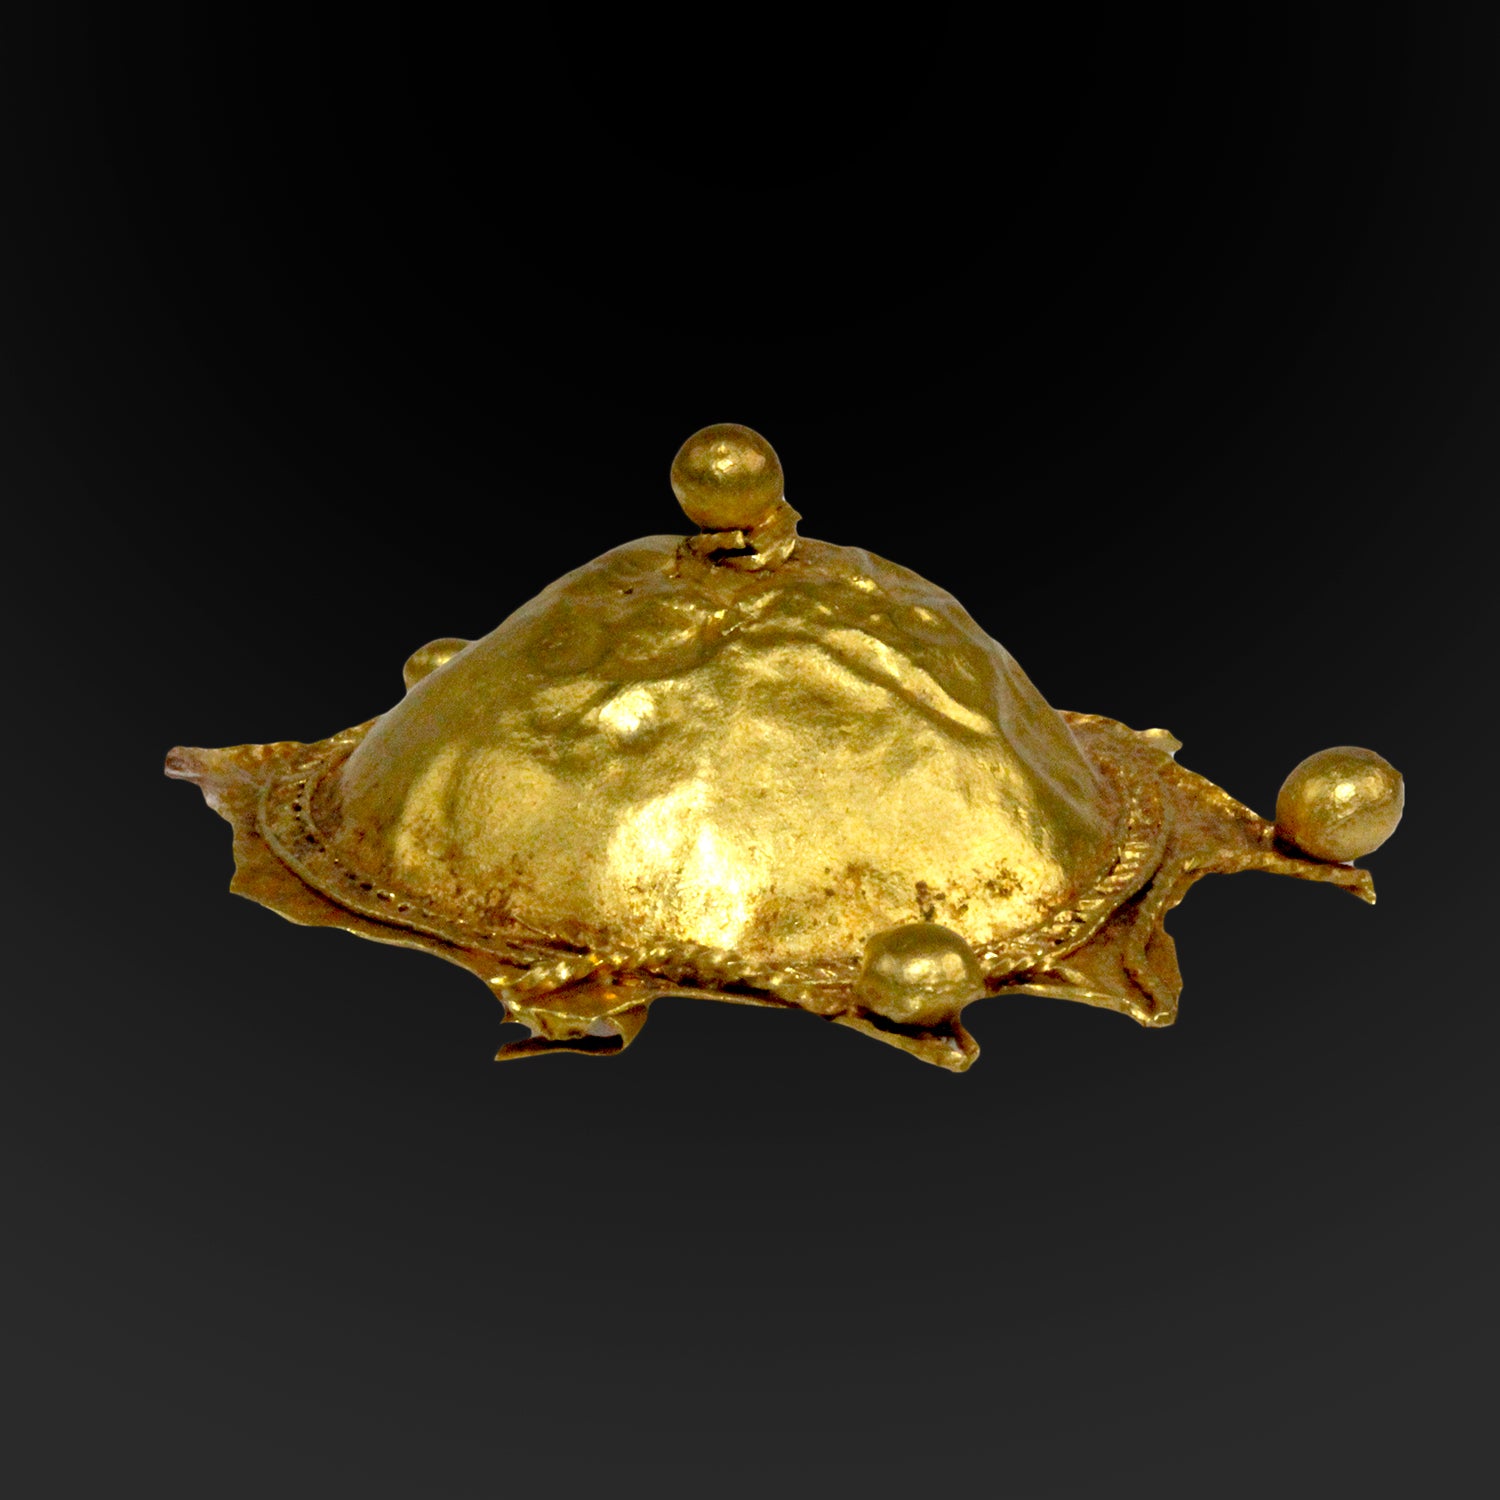 A Published Holy Land Gold Brooch, ca late 4th century BCE